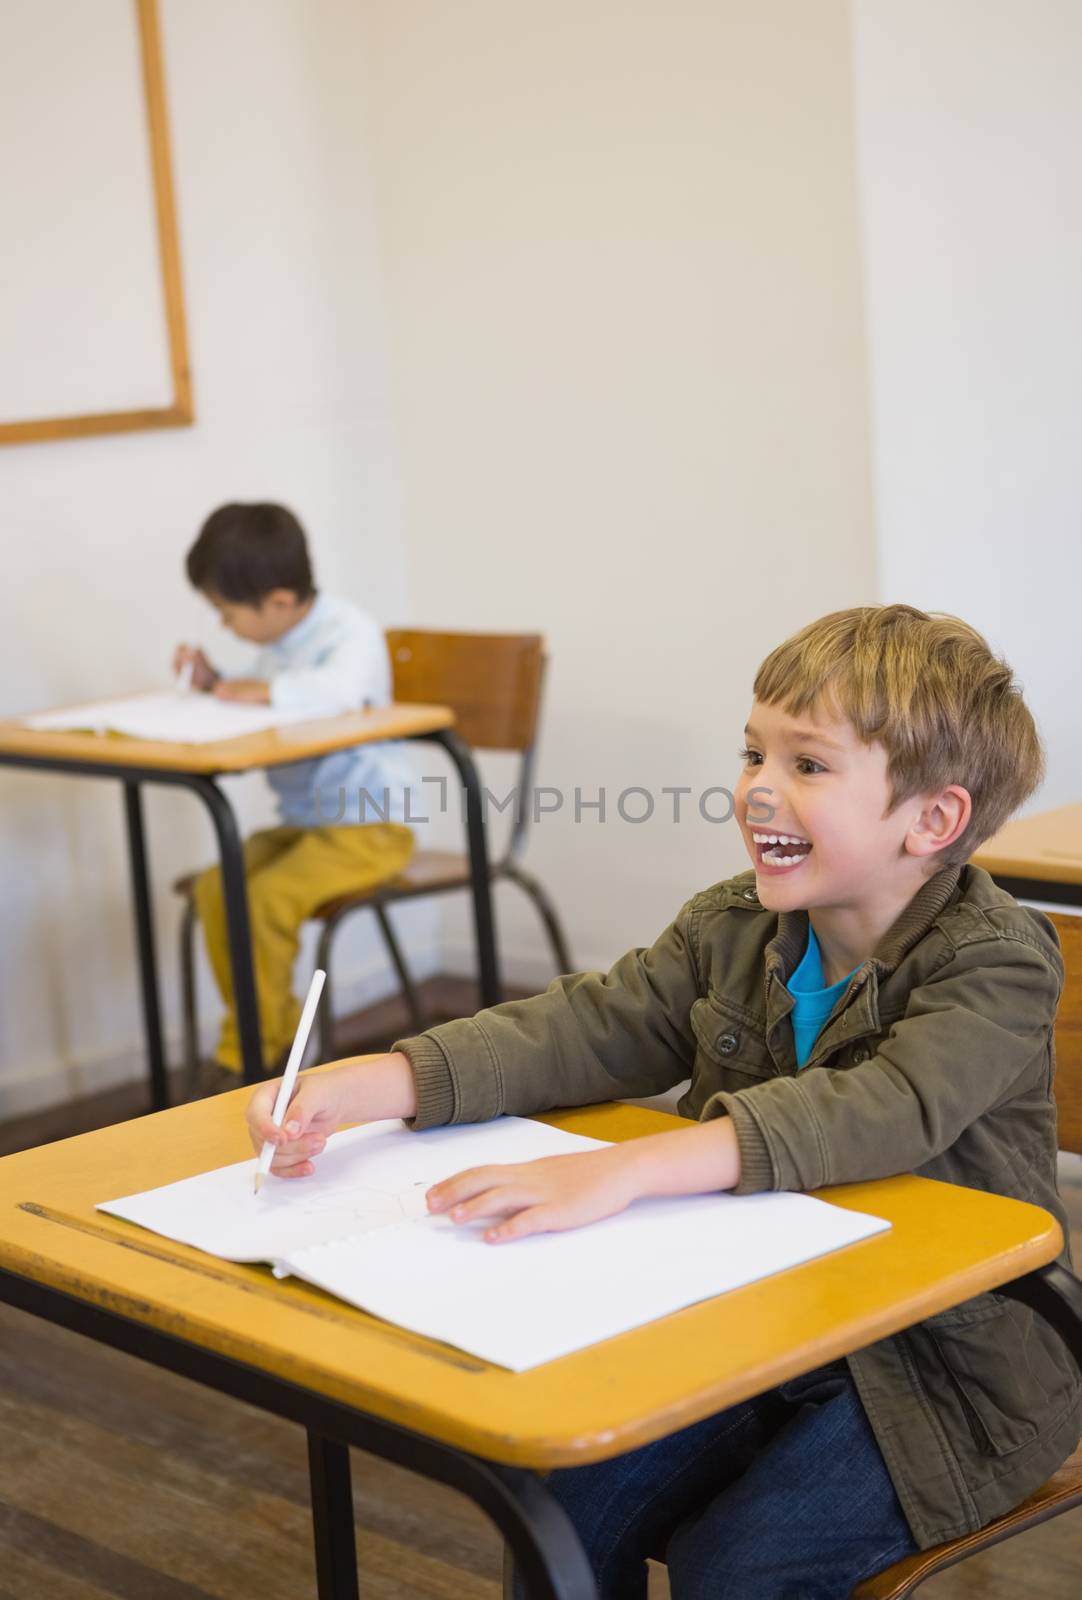 Pupil writing in notepad at his desk smiling at the elementary school